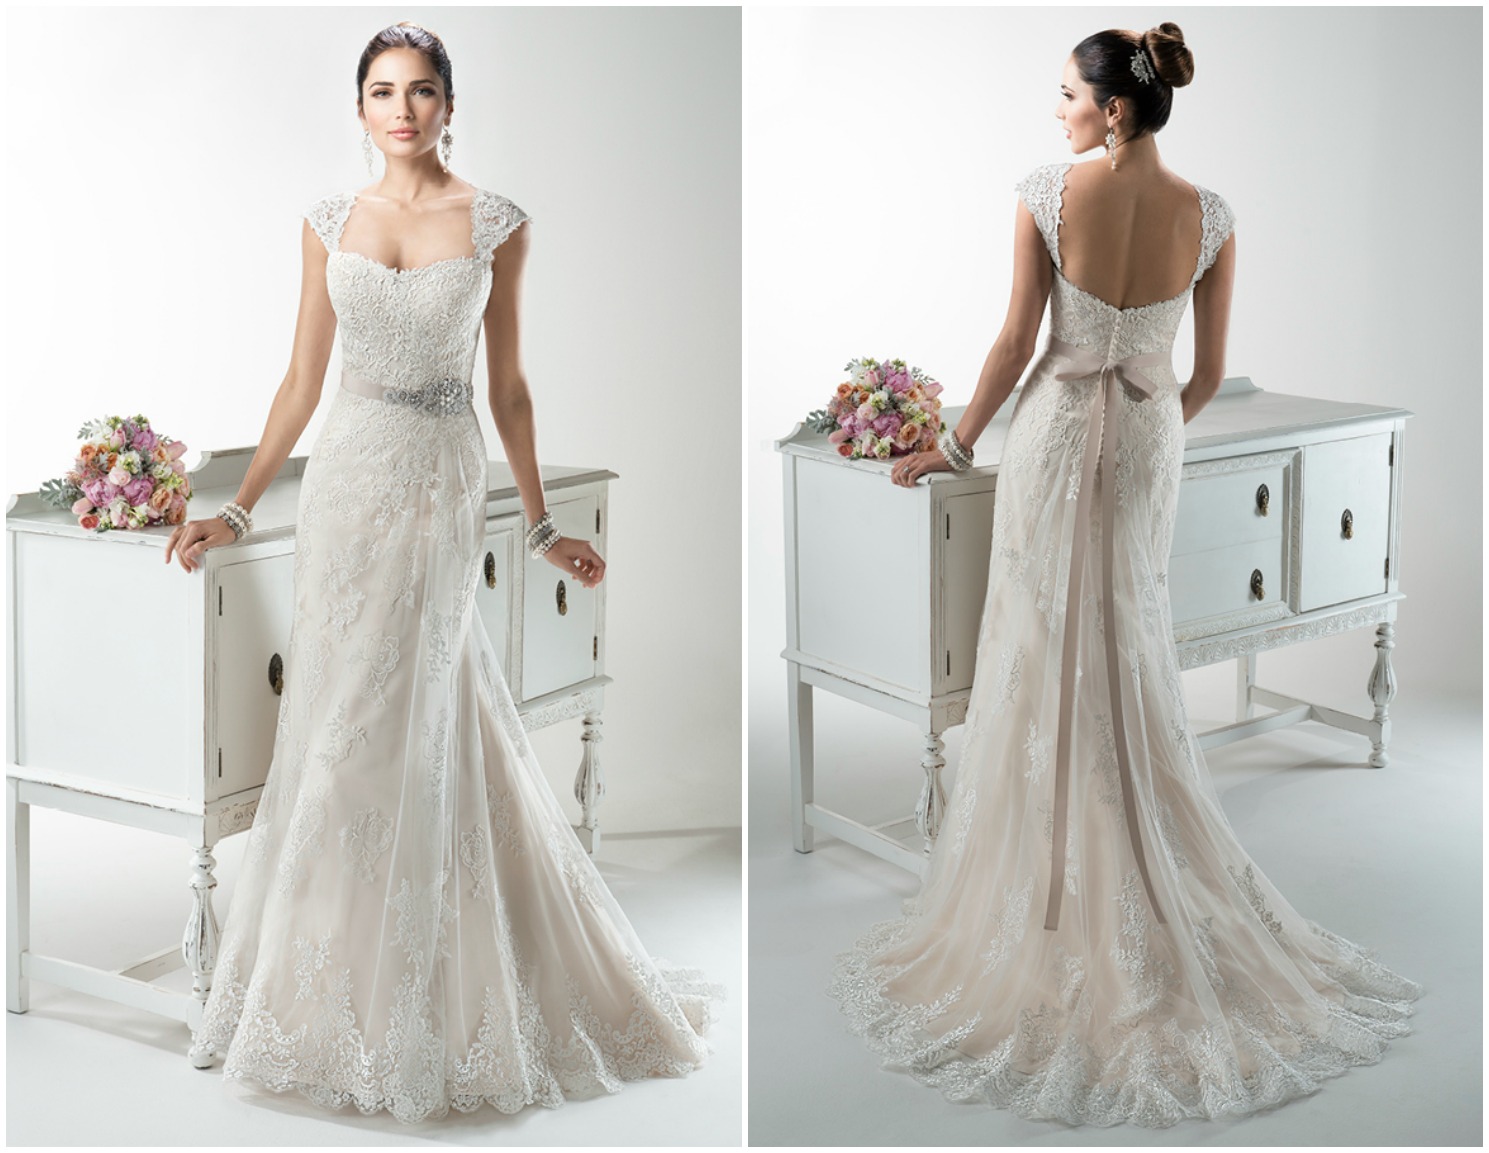 <a href="http://www.maggiesottero.com/dress.aspx?style=4MS062" target="_blank">Maggie Sottero</a>